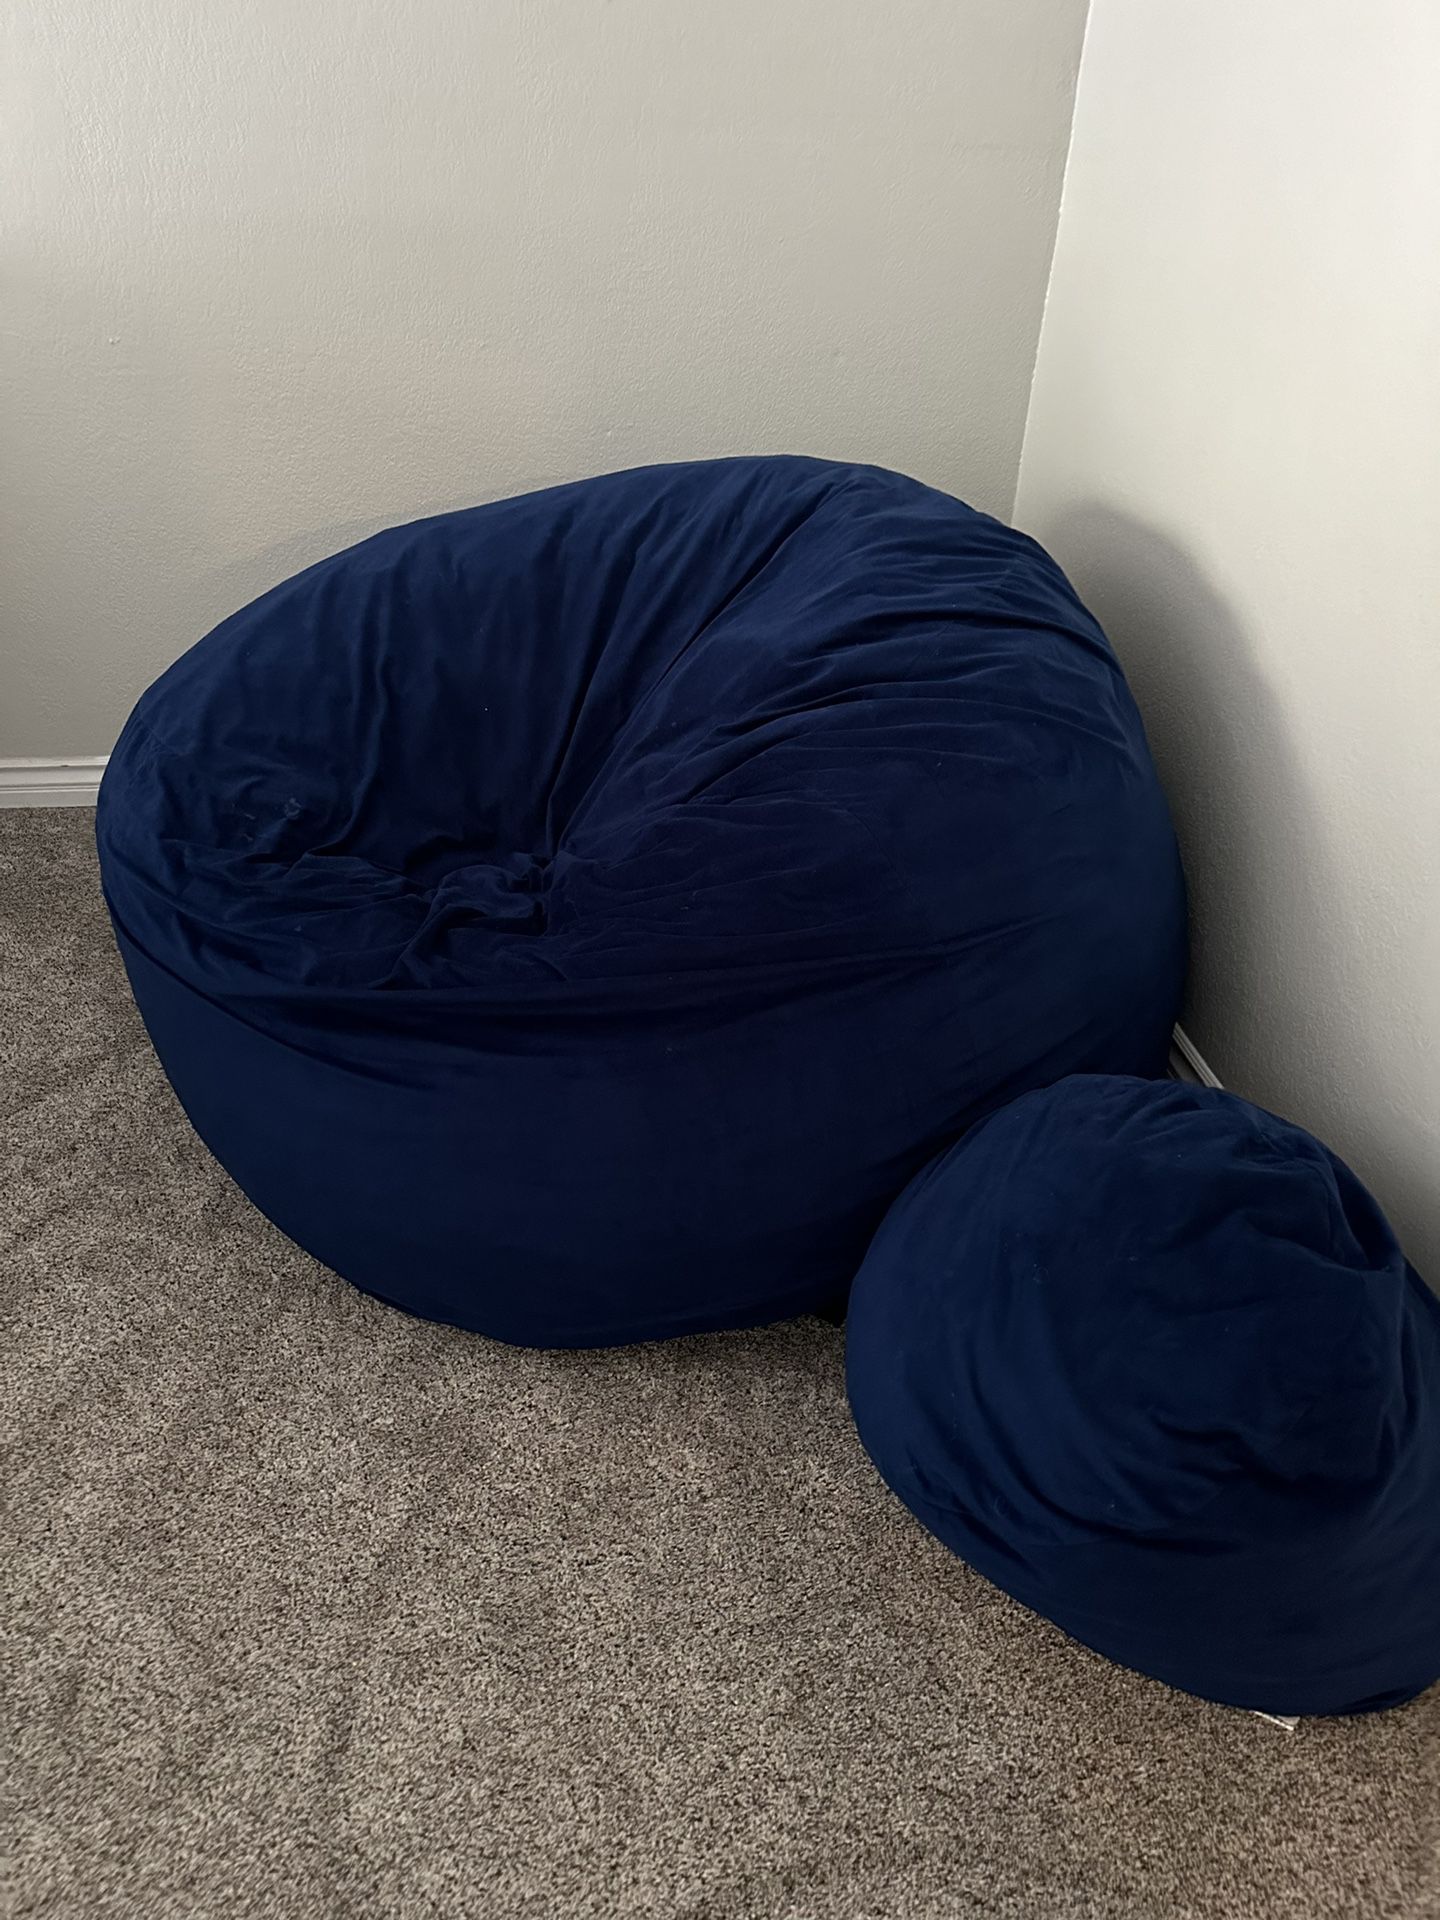 Large Blue Bean Bag Chair For Adults 